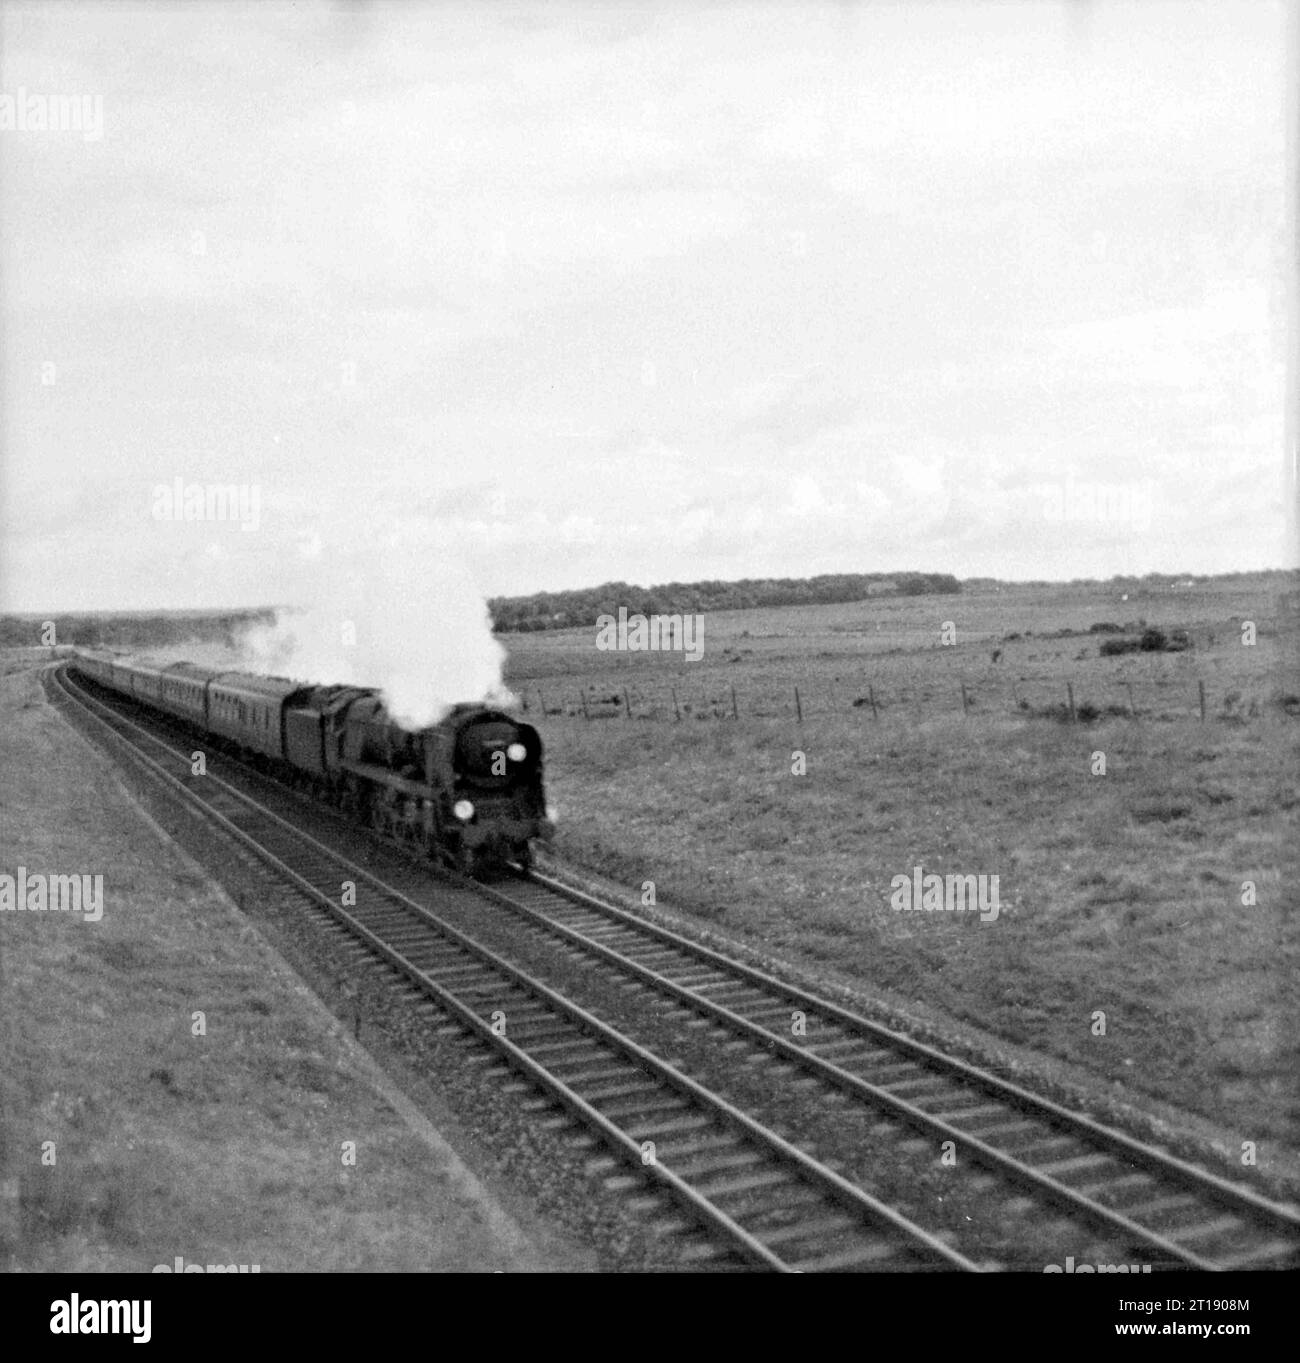 Brockenhurst in the New Forest England, on a summer's day showing Southern Railway engines working the journey between London Waterloo to Weymouth, in 1965-66 Stock Photo